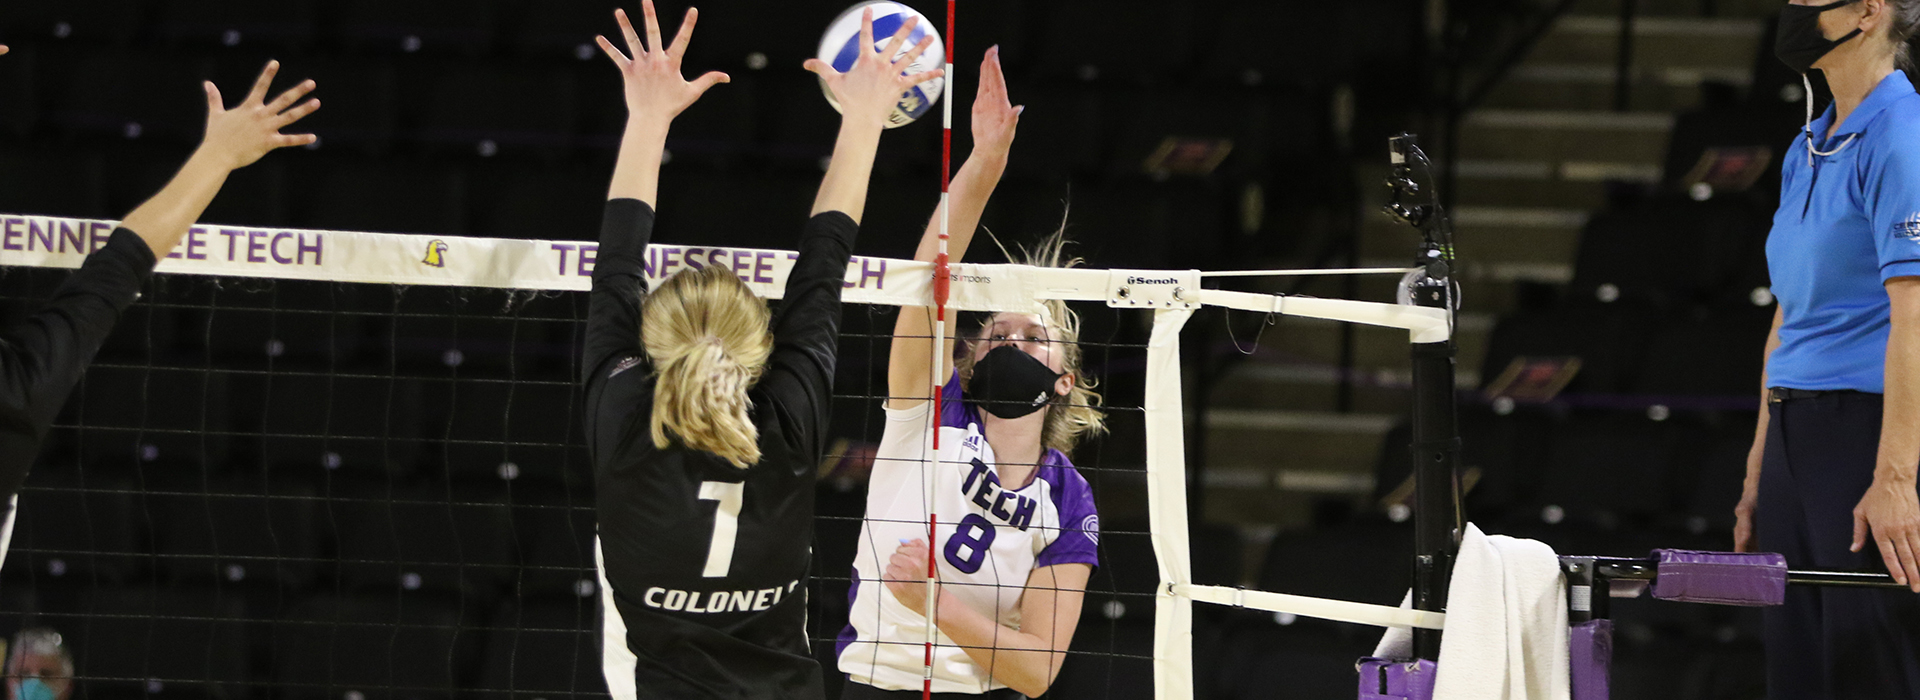 Tech falls to undefeated Jacksonville State 3-1 in Pete Mathews Coliseum